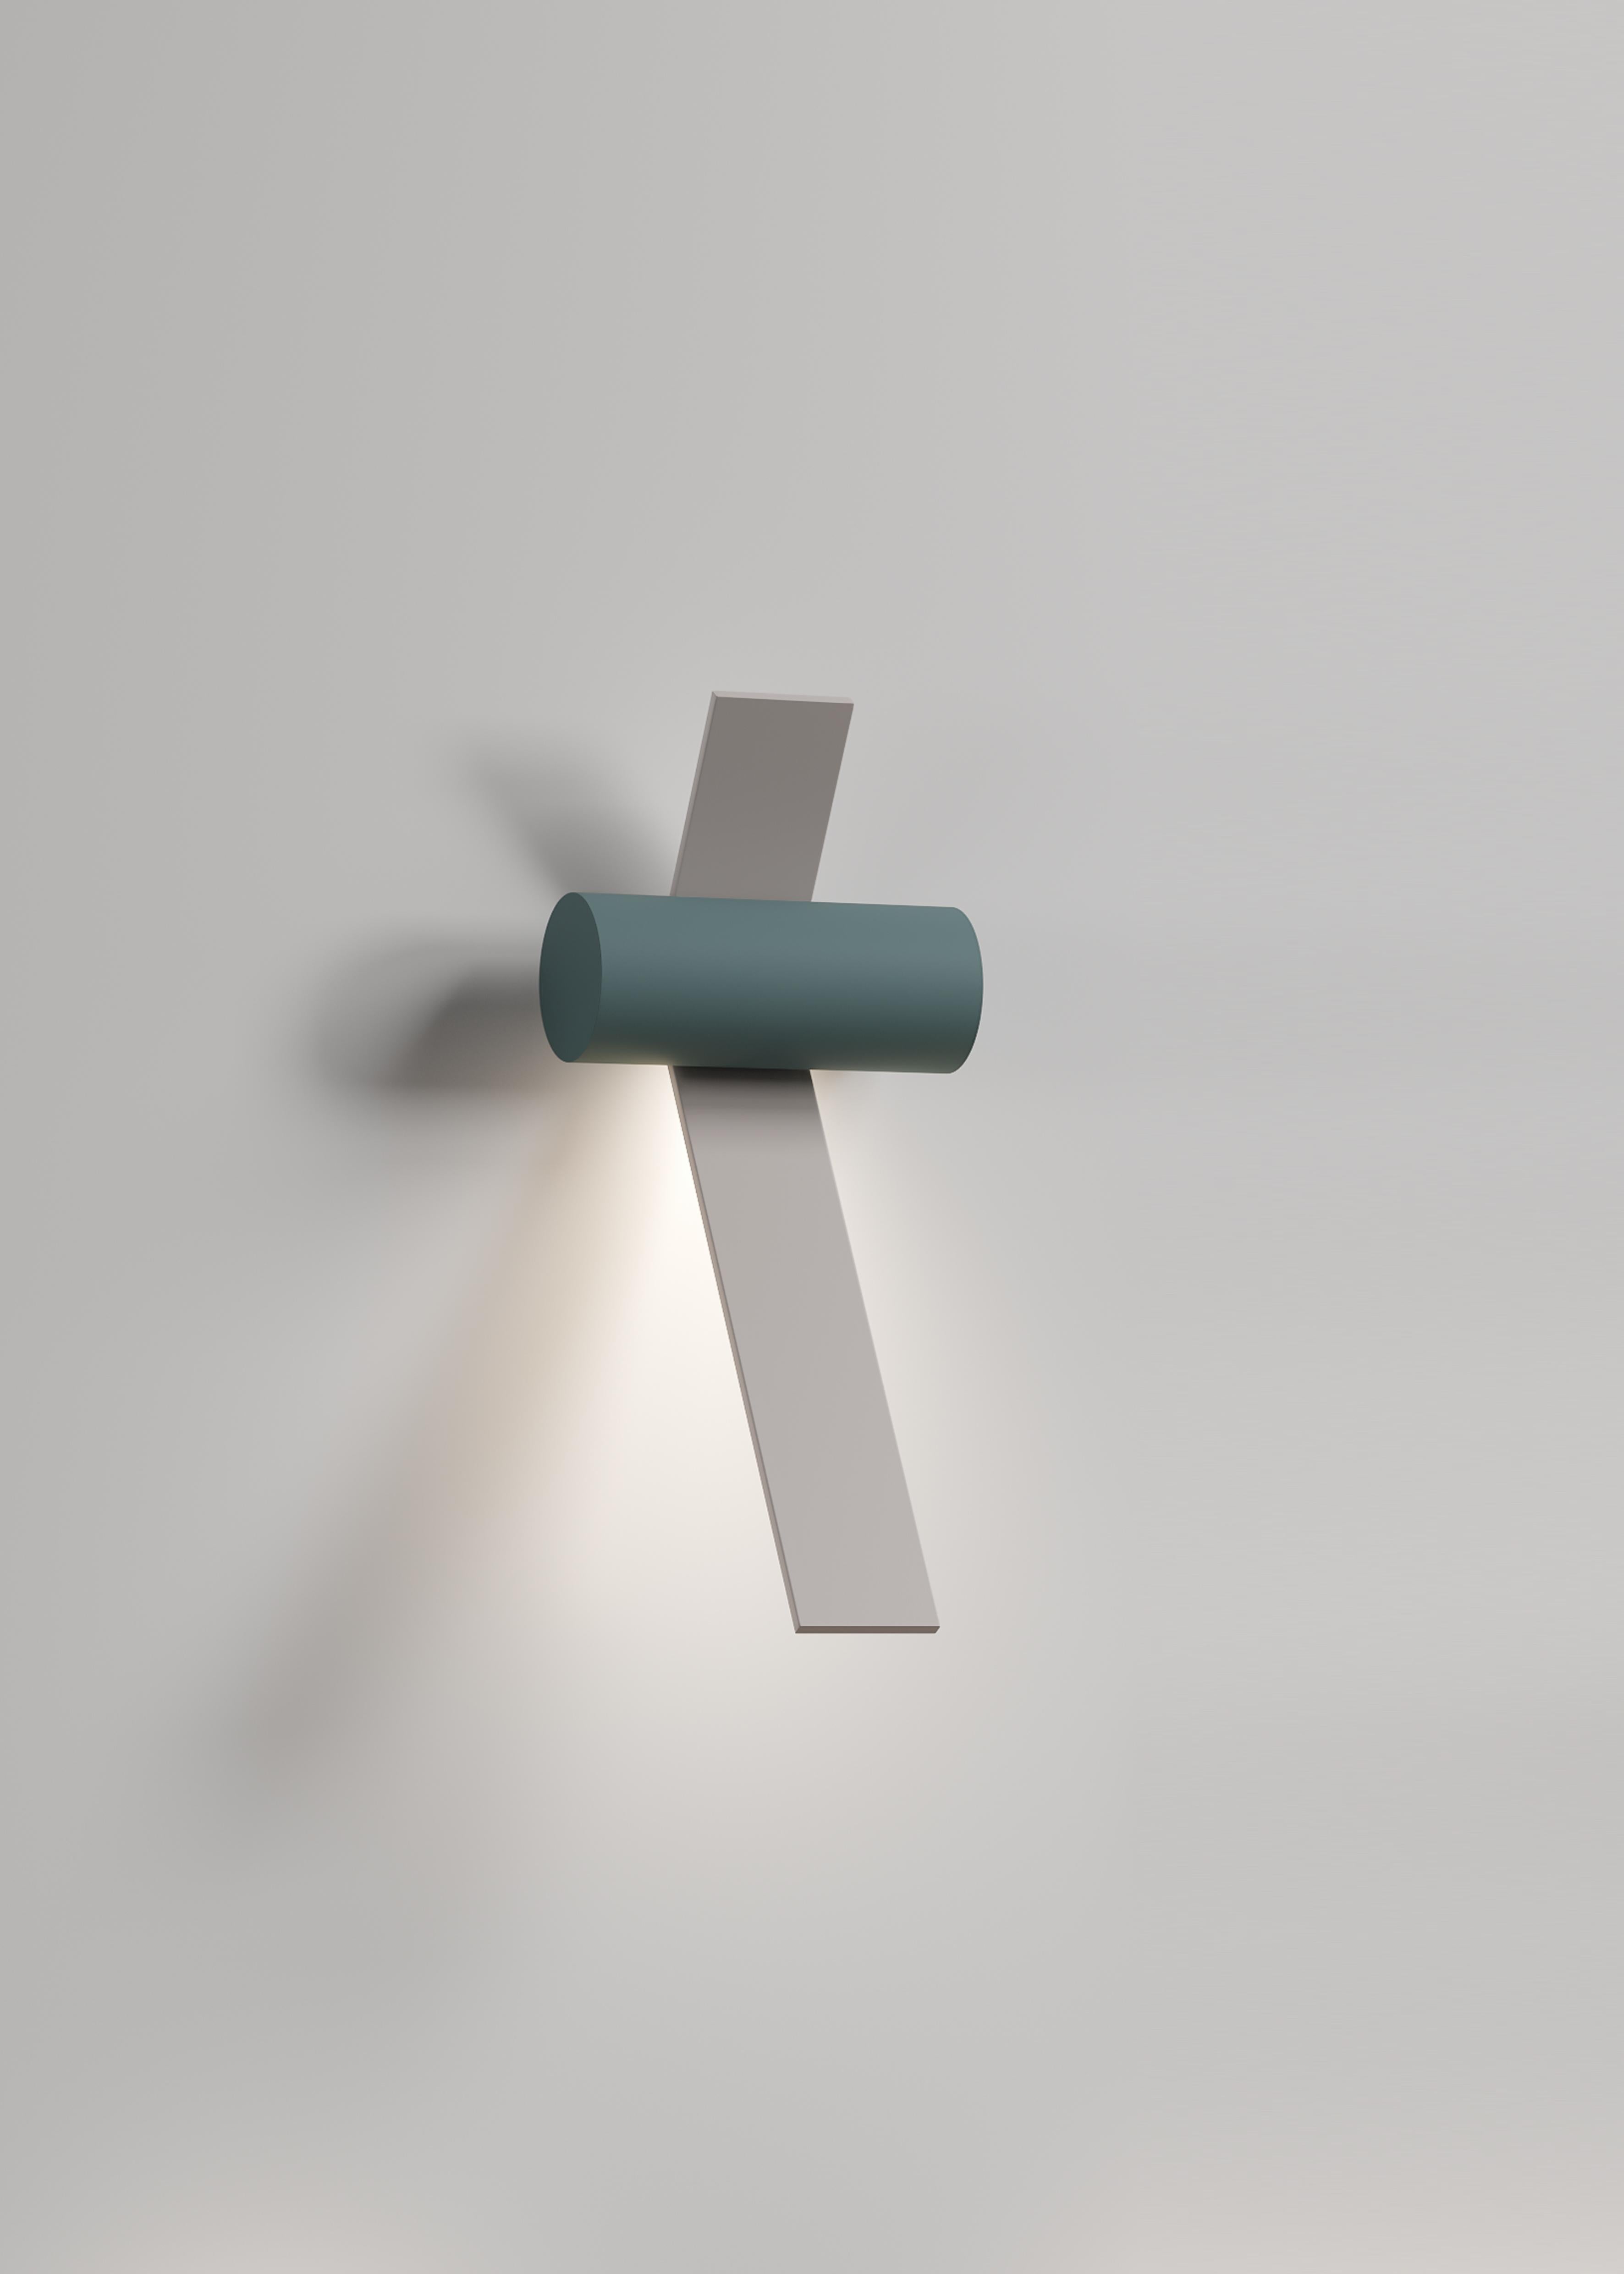 Metal Modern Wall Lamp 'Nastro 563.41' by Studiopepe x TOOY, Beige & Concrete For Sale